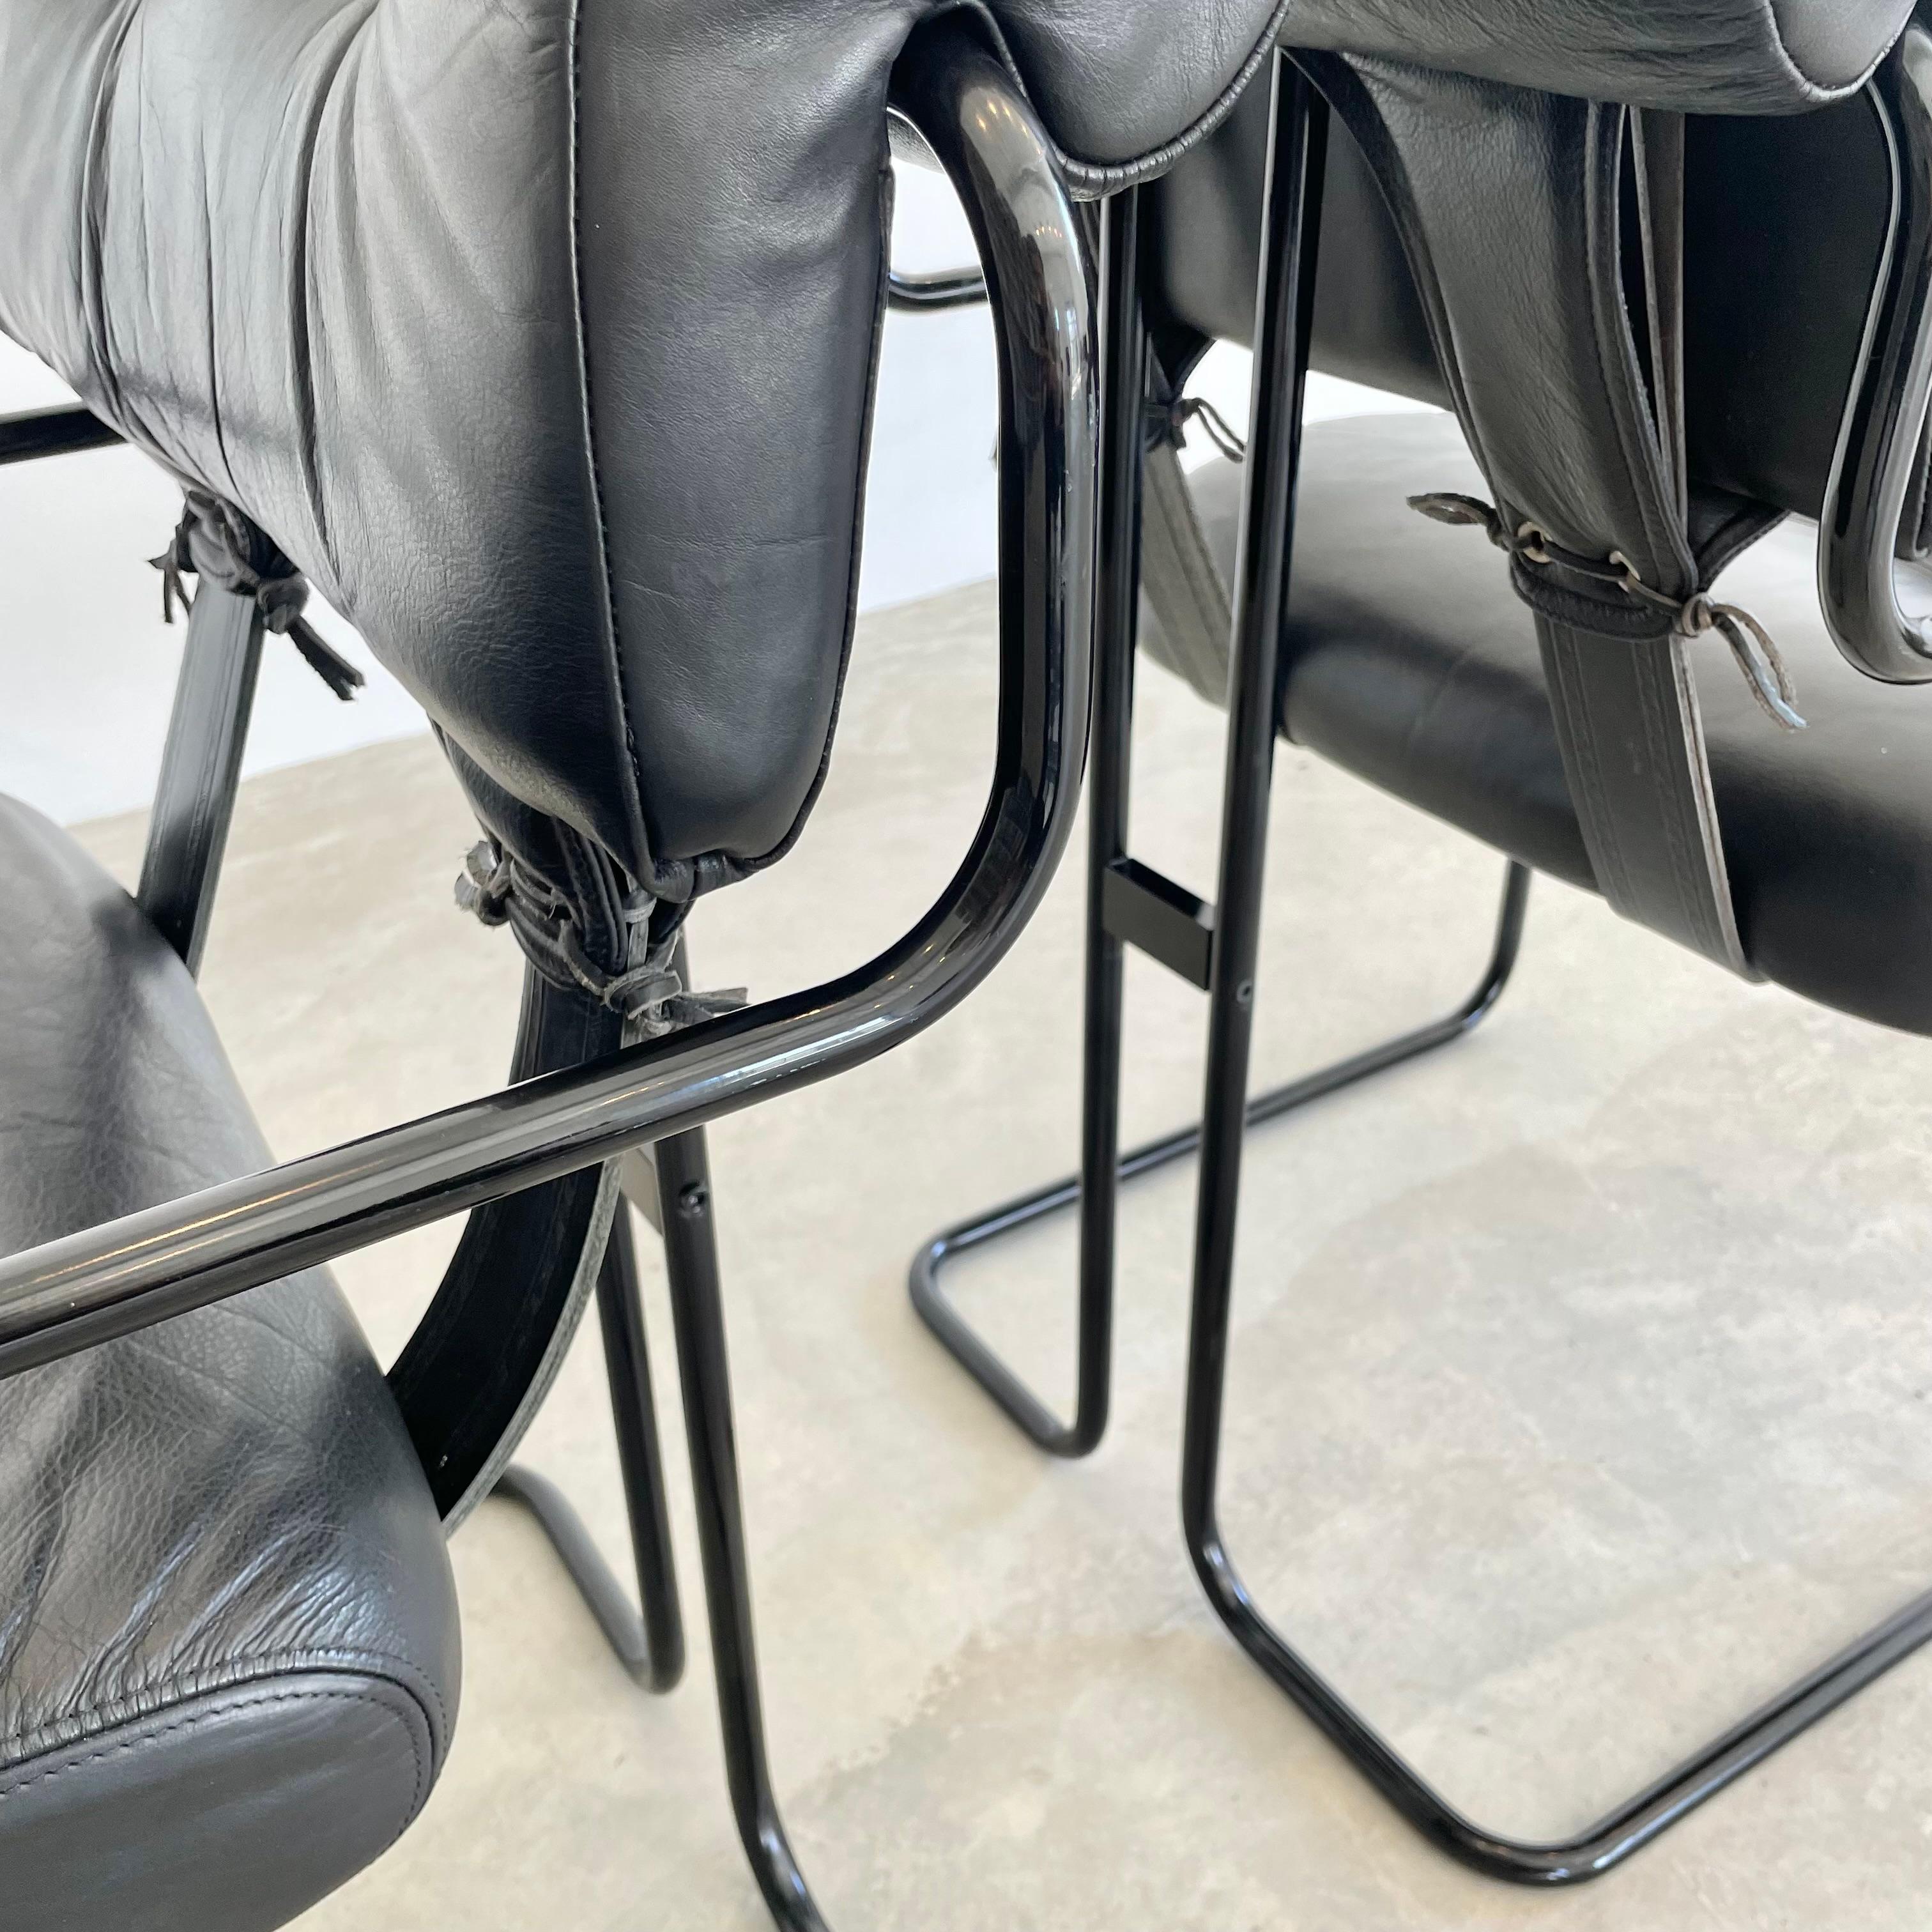 Guido Faleschini Tucroma Dining Chairs in Black Leather for Mariani, 1980s Italy For Sale 11